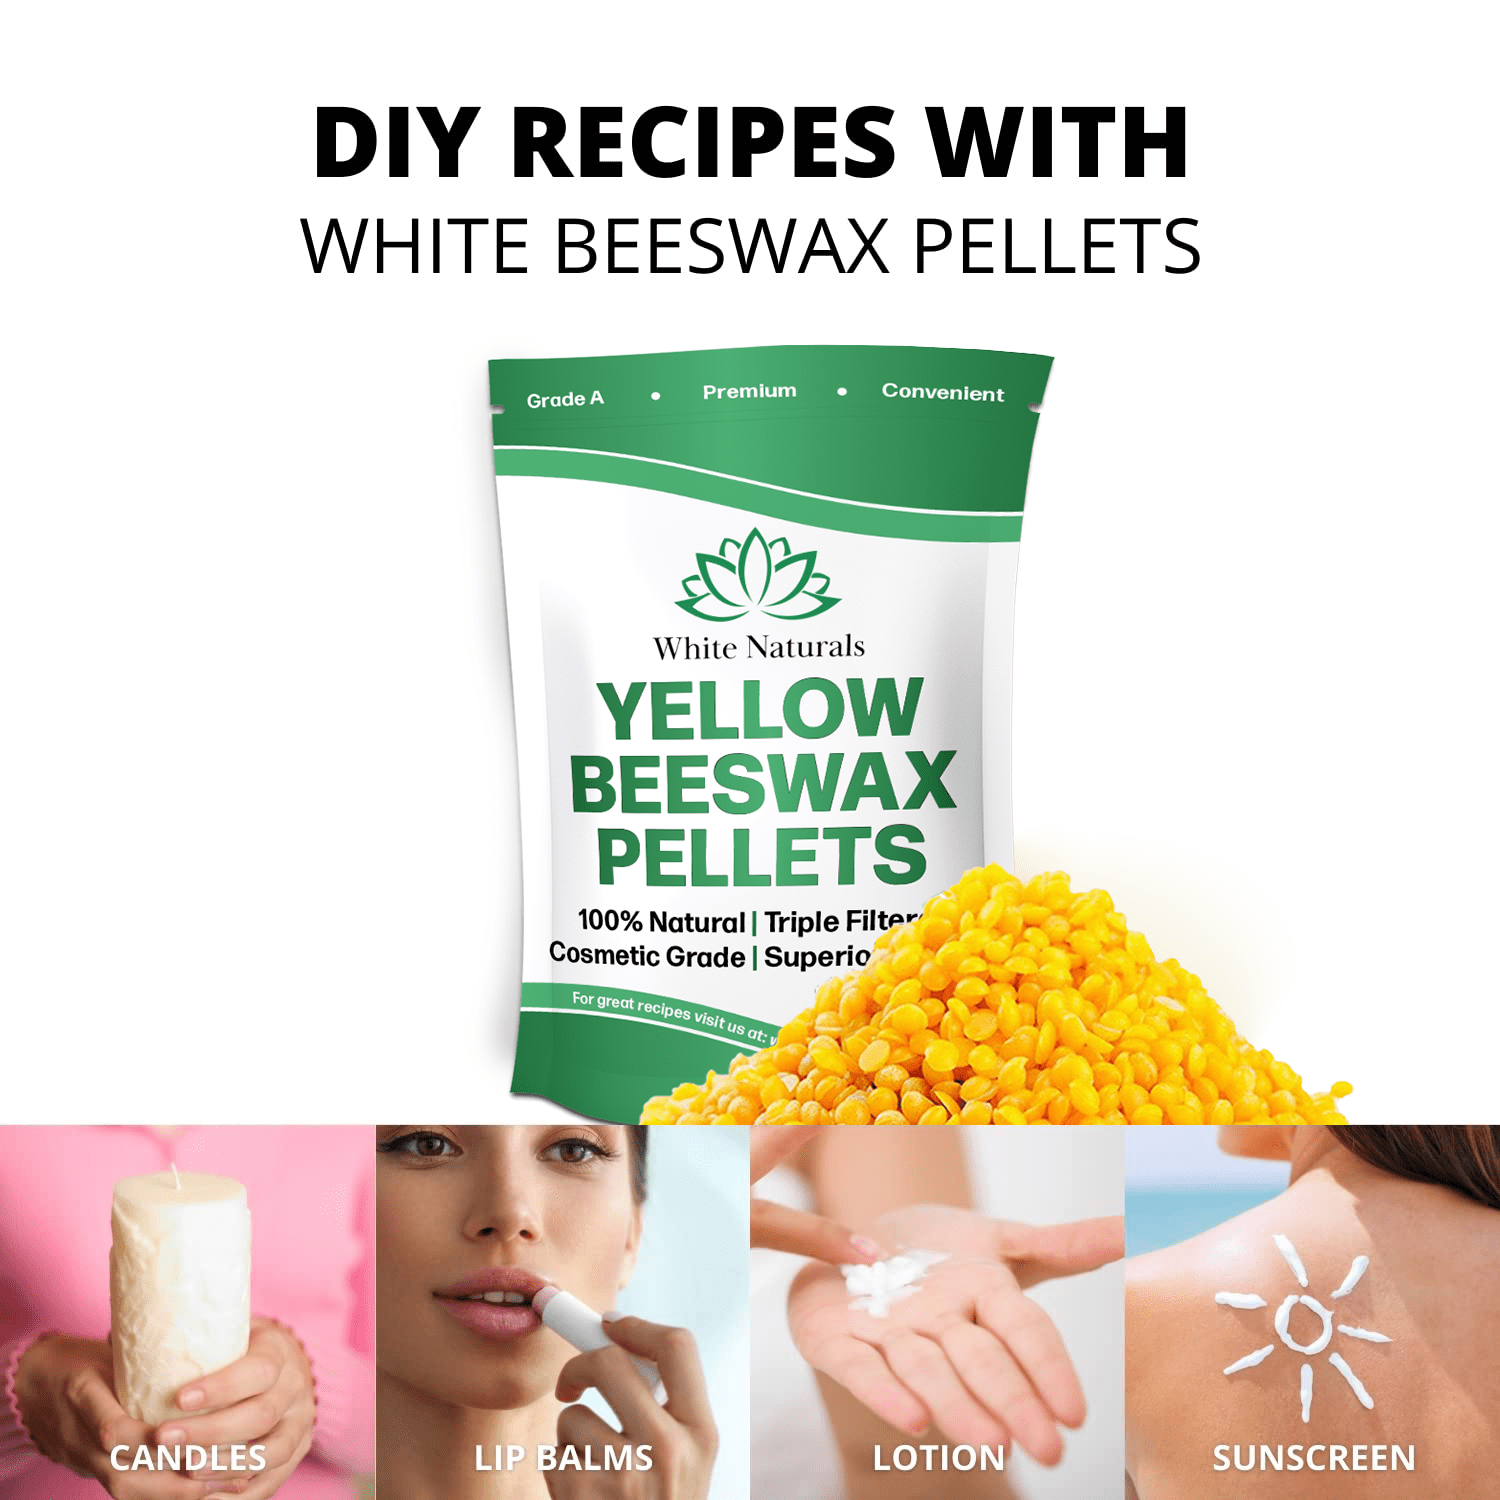  YASNAY Yellow Beeswax Pellets 20LB, 100% Organic Beeswax,  Beeswax for Candle Making, Body, Skin Care DIY, Lip Balm and Soap Making  Supplies